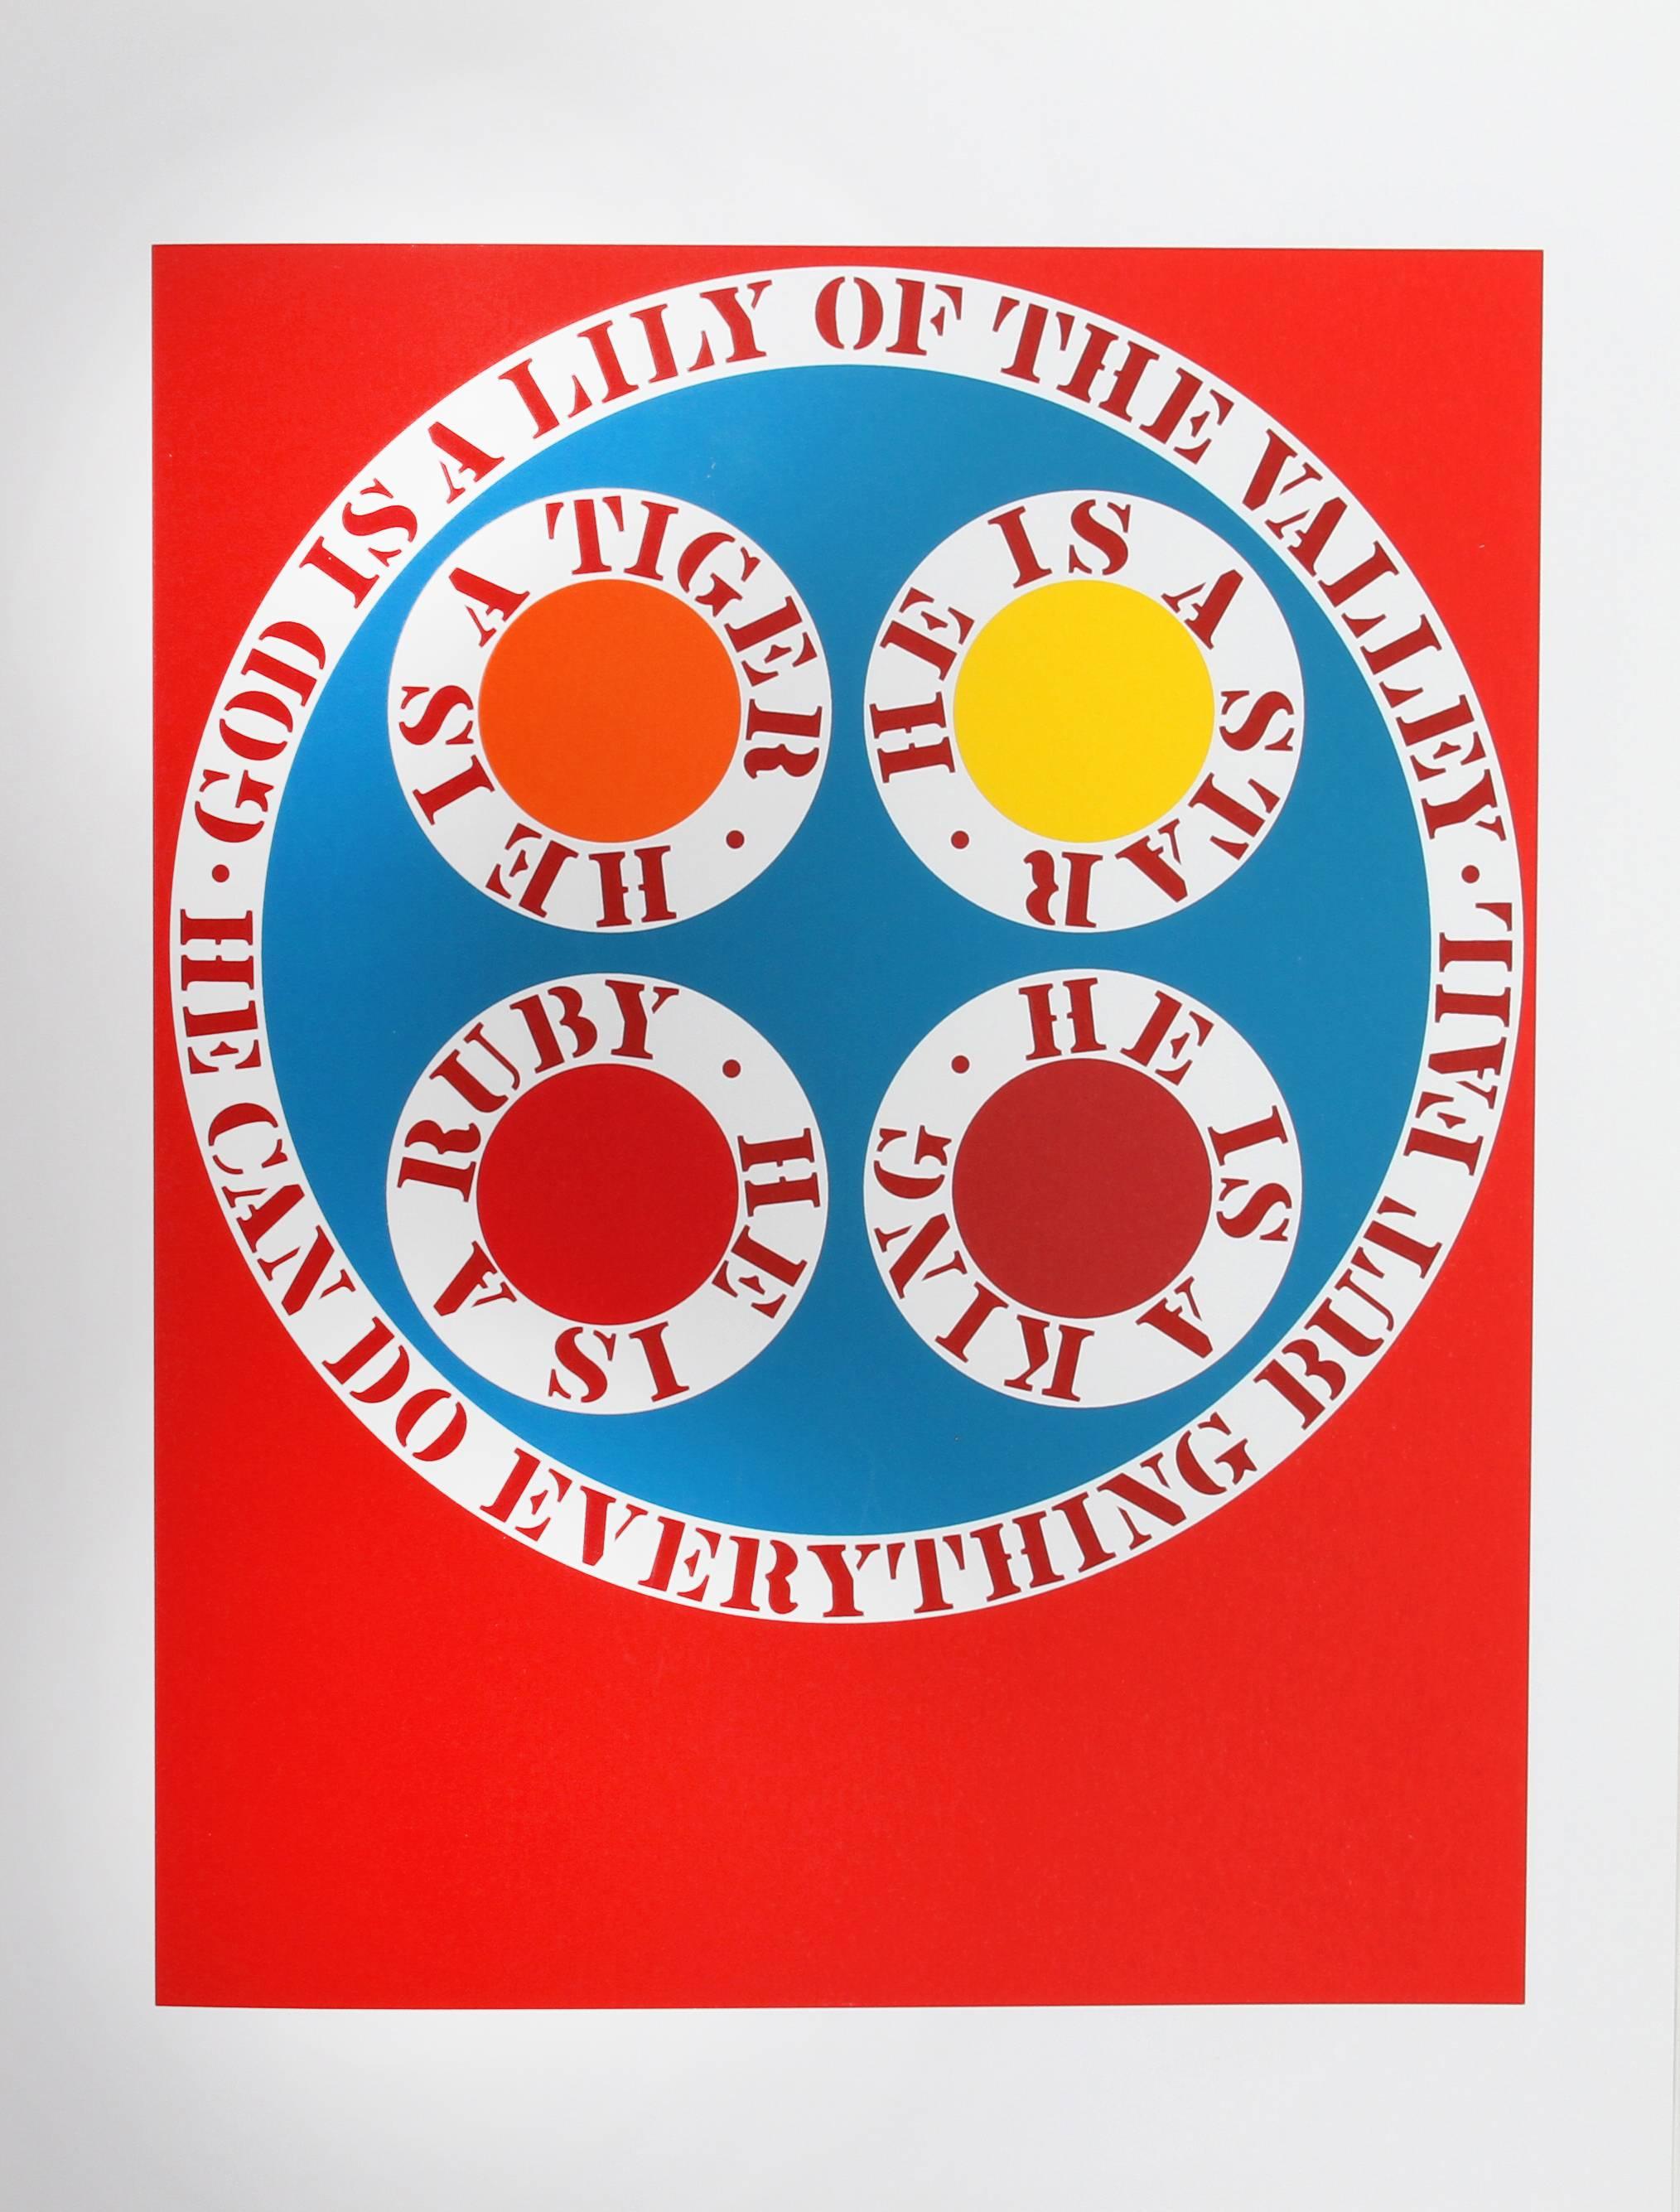 "God is Lily of the Valley", from the American Dream Portfolio by Robert Indiana